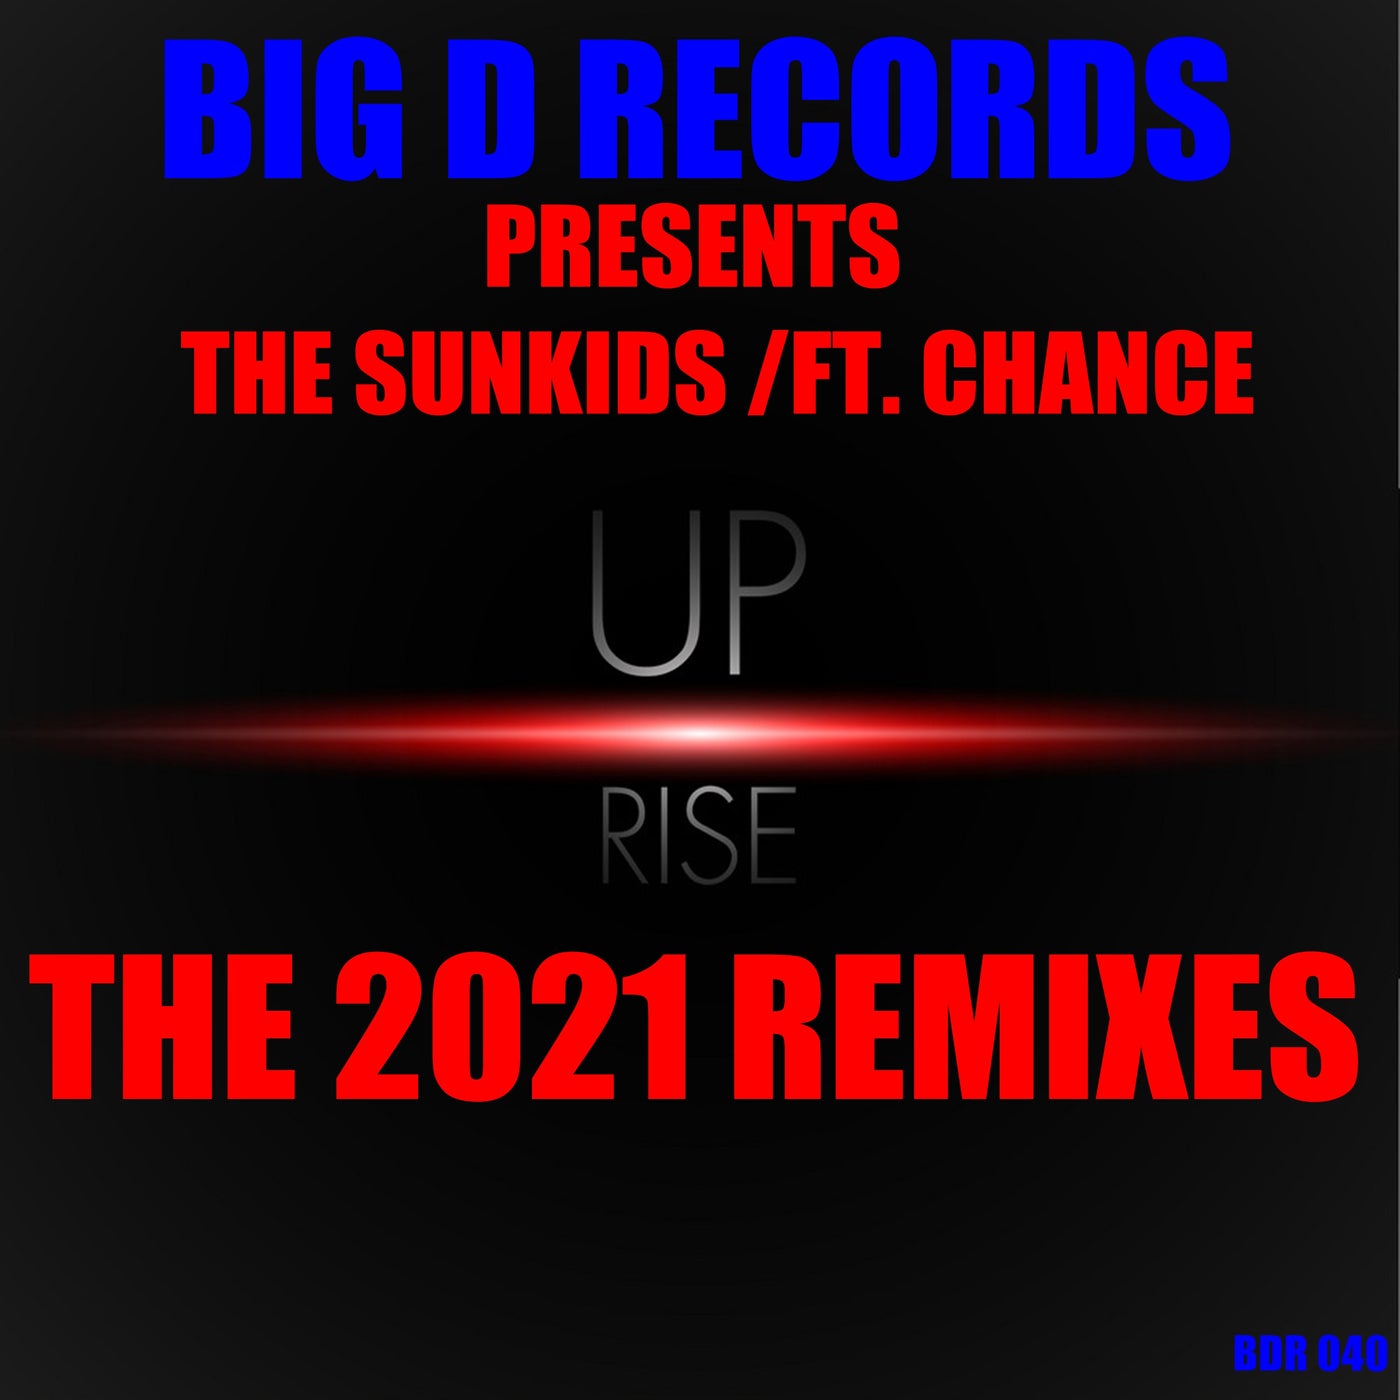 THE SUNKIDS - Rise up (The 2021 Remixes) [feat. C.H.A.N.C.E.] [Big D Records]